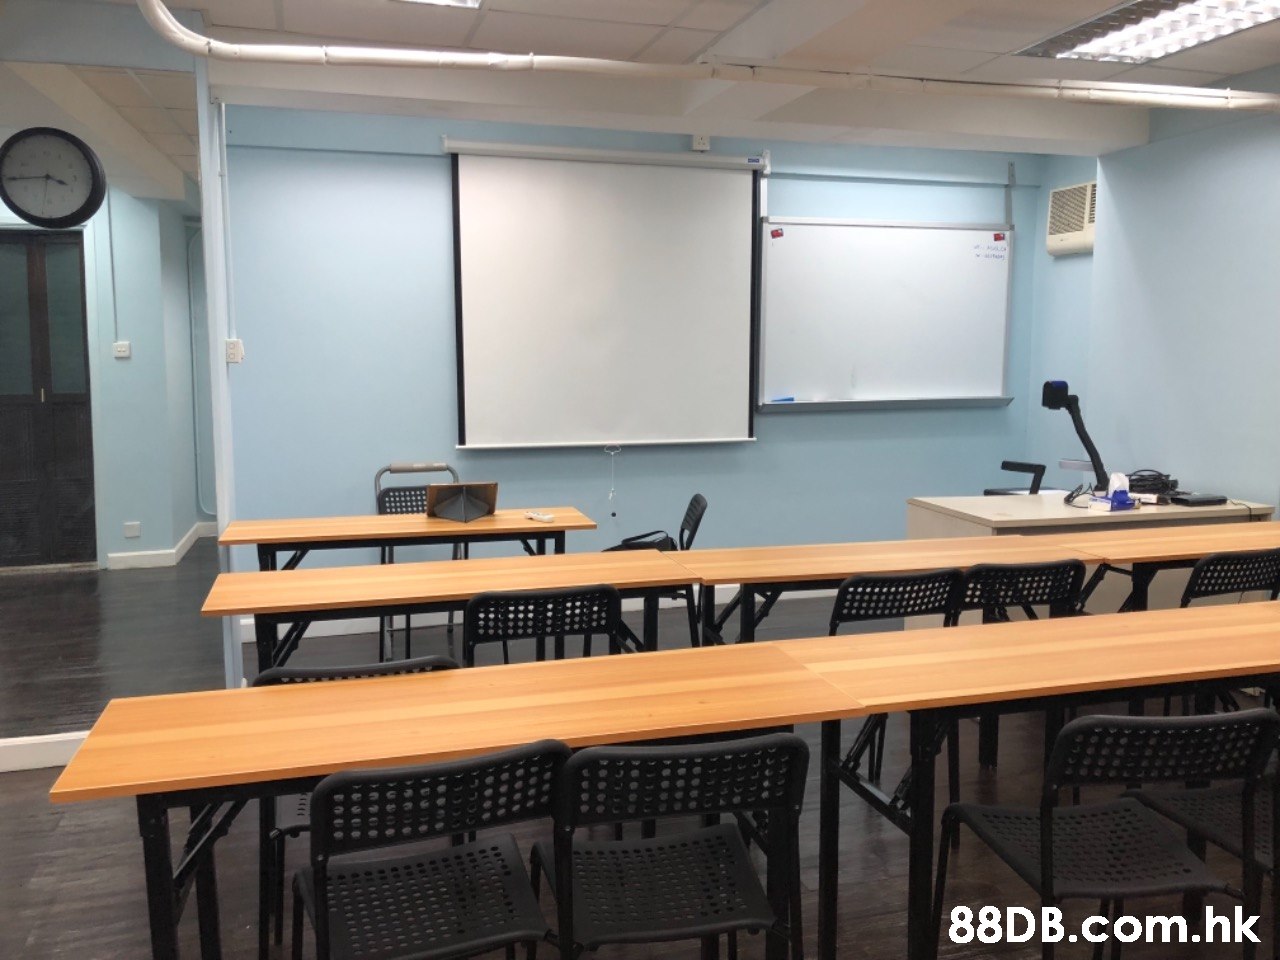 .hk  Classroom,Room,Building,Conference hall,Furniture